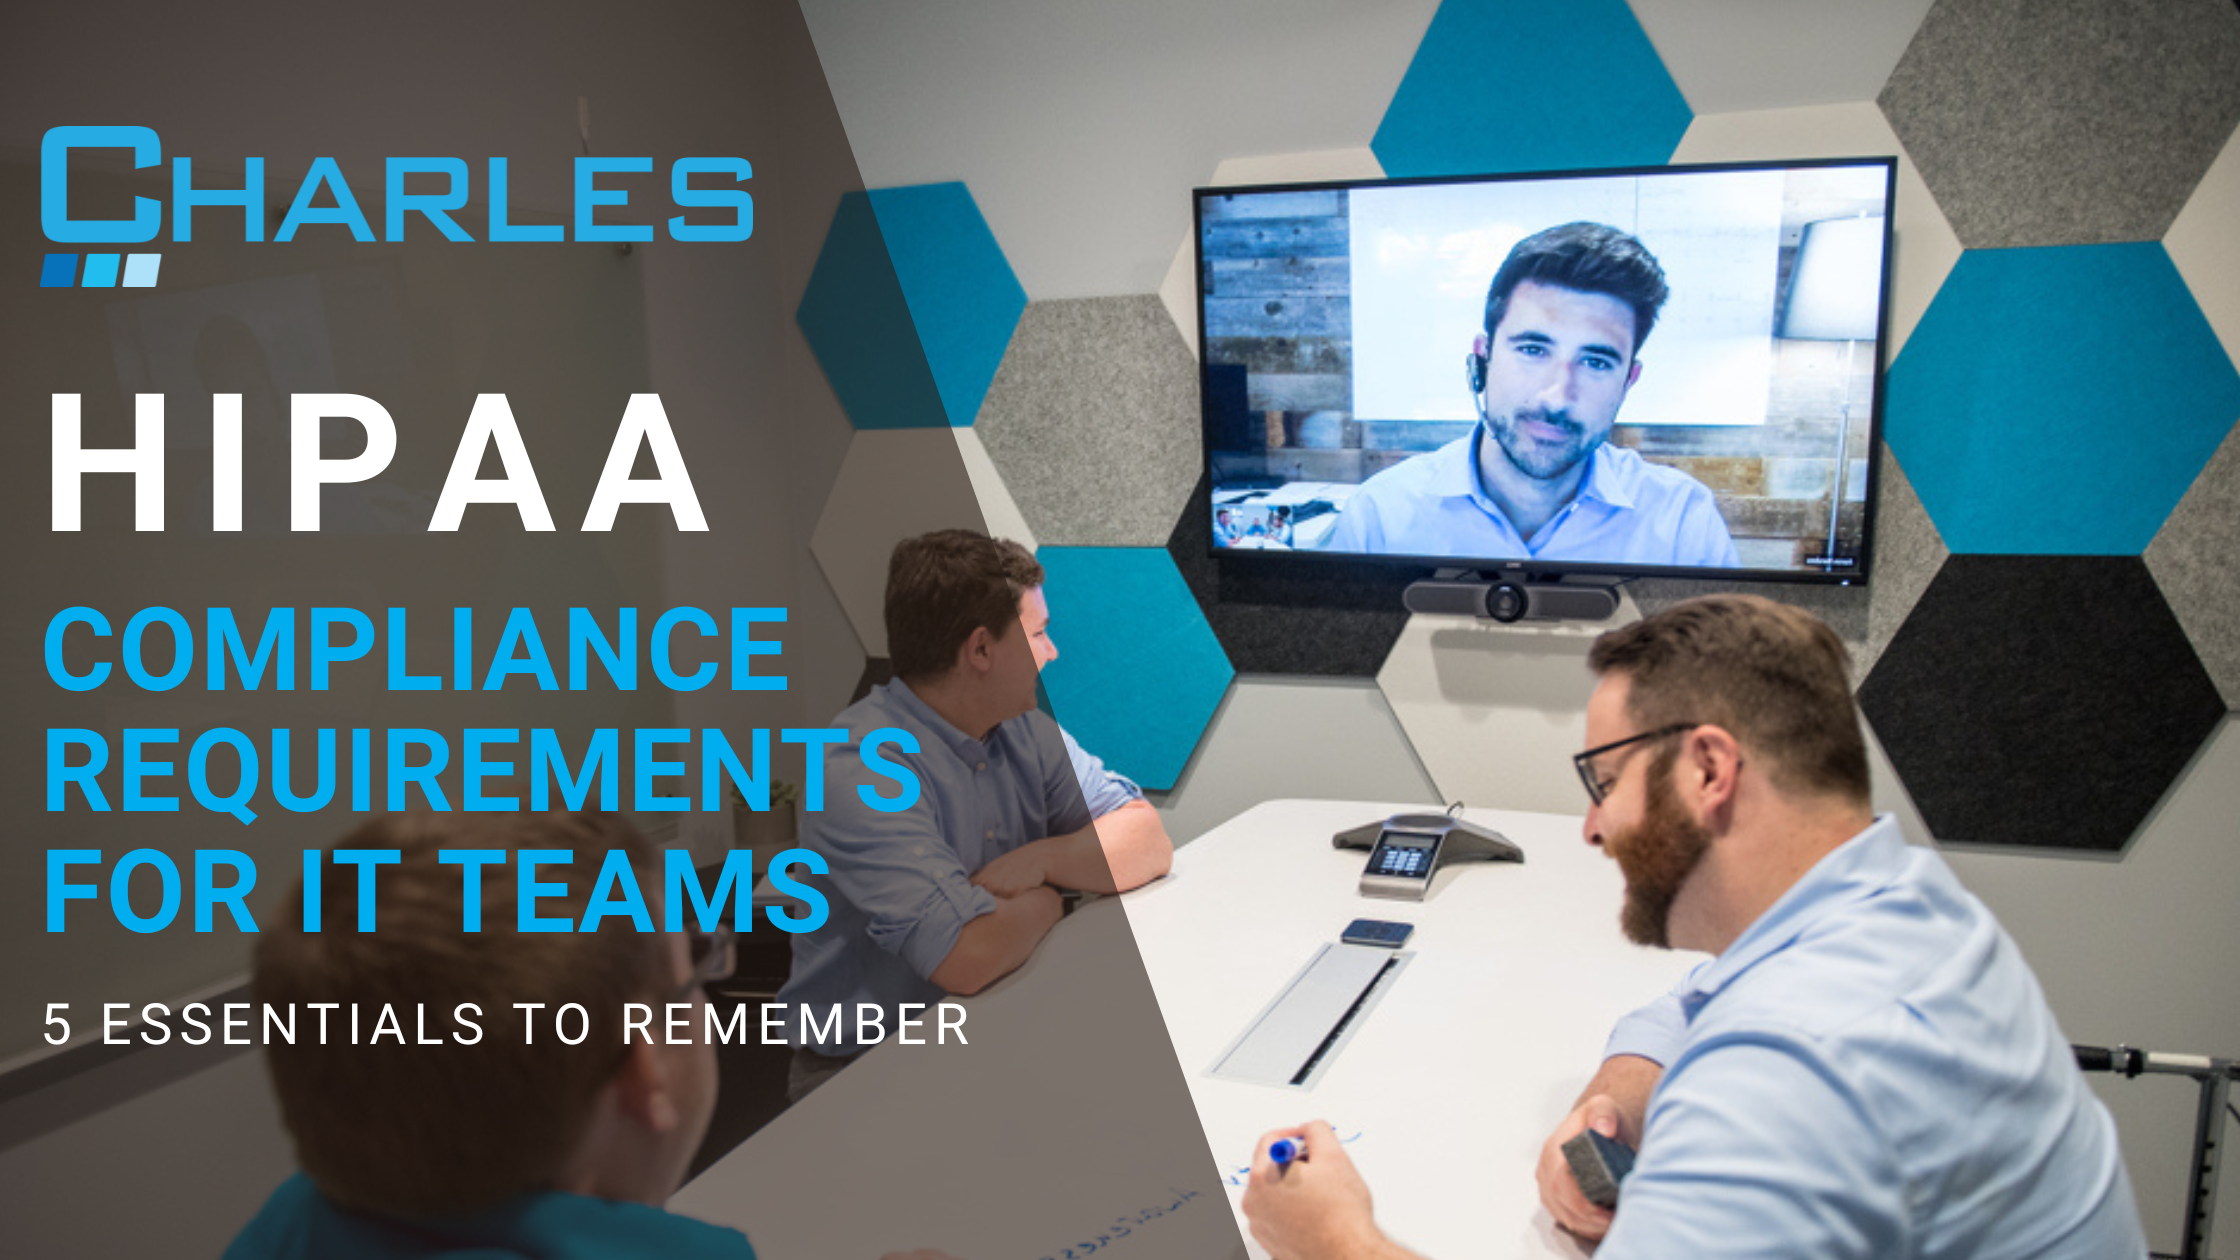 HIPAA compliance requirements for IT teams: 5 essentials to remember